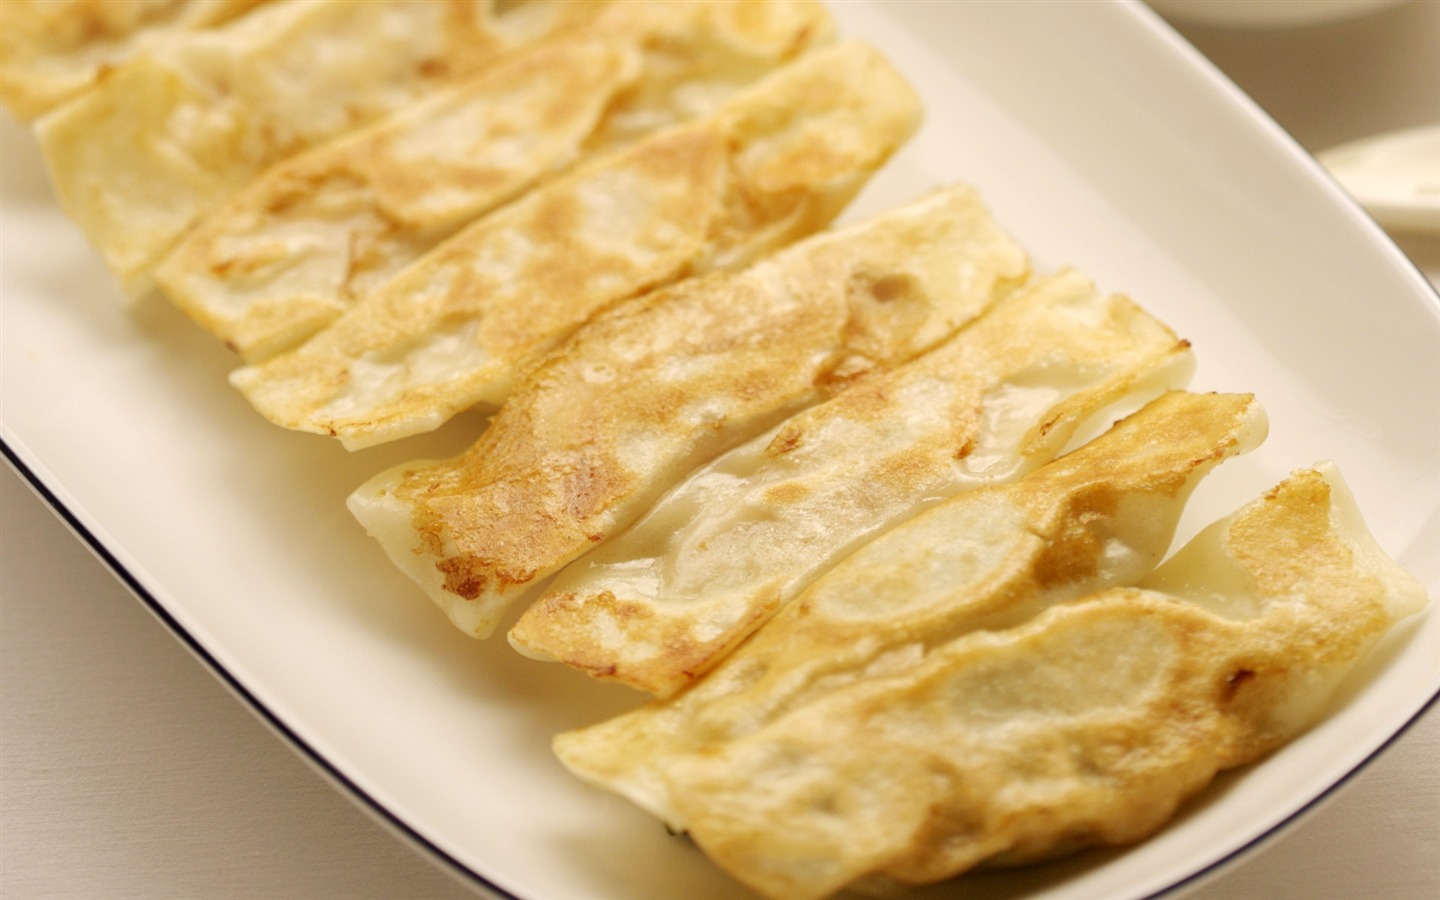 Chinese snacks pastry wallpaper (2) #15 - 1440x900